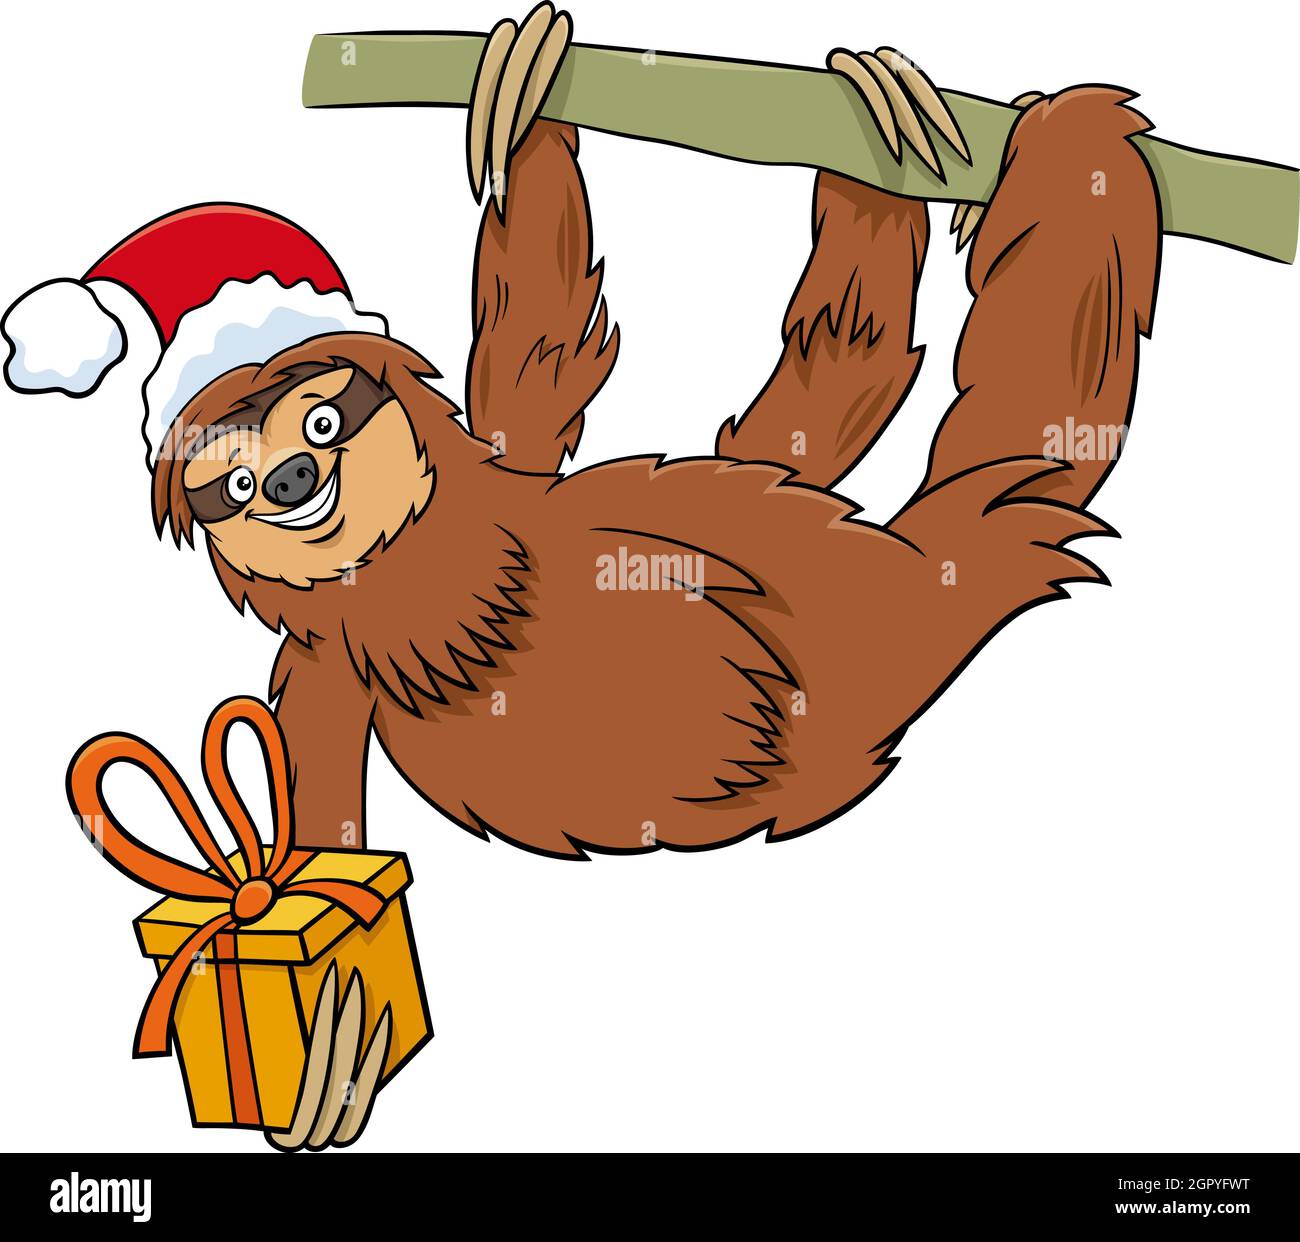 Cartoon illustration of sloth animal character with present on Christmas time Stock Vector